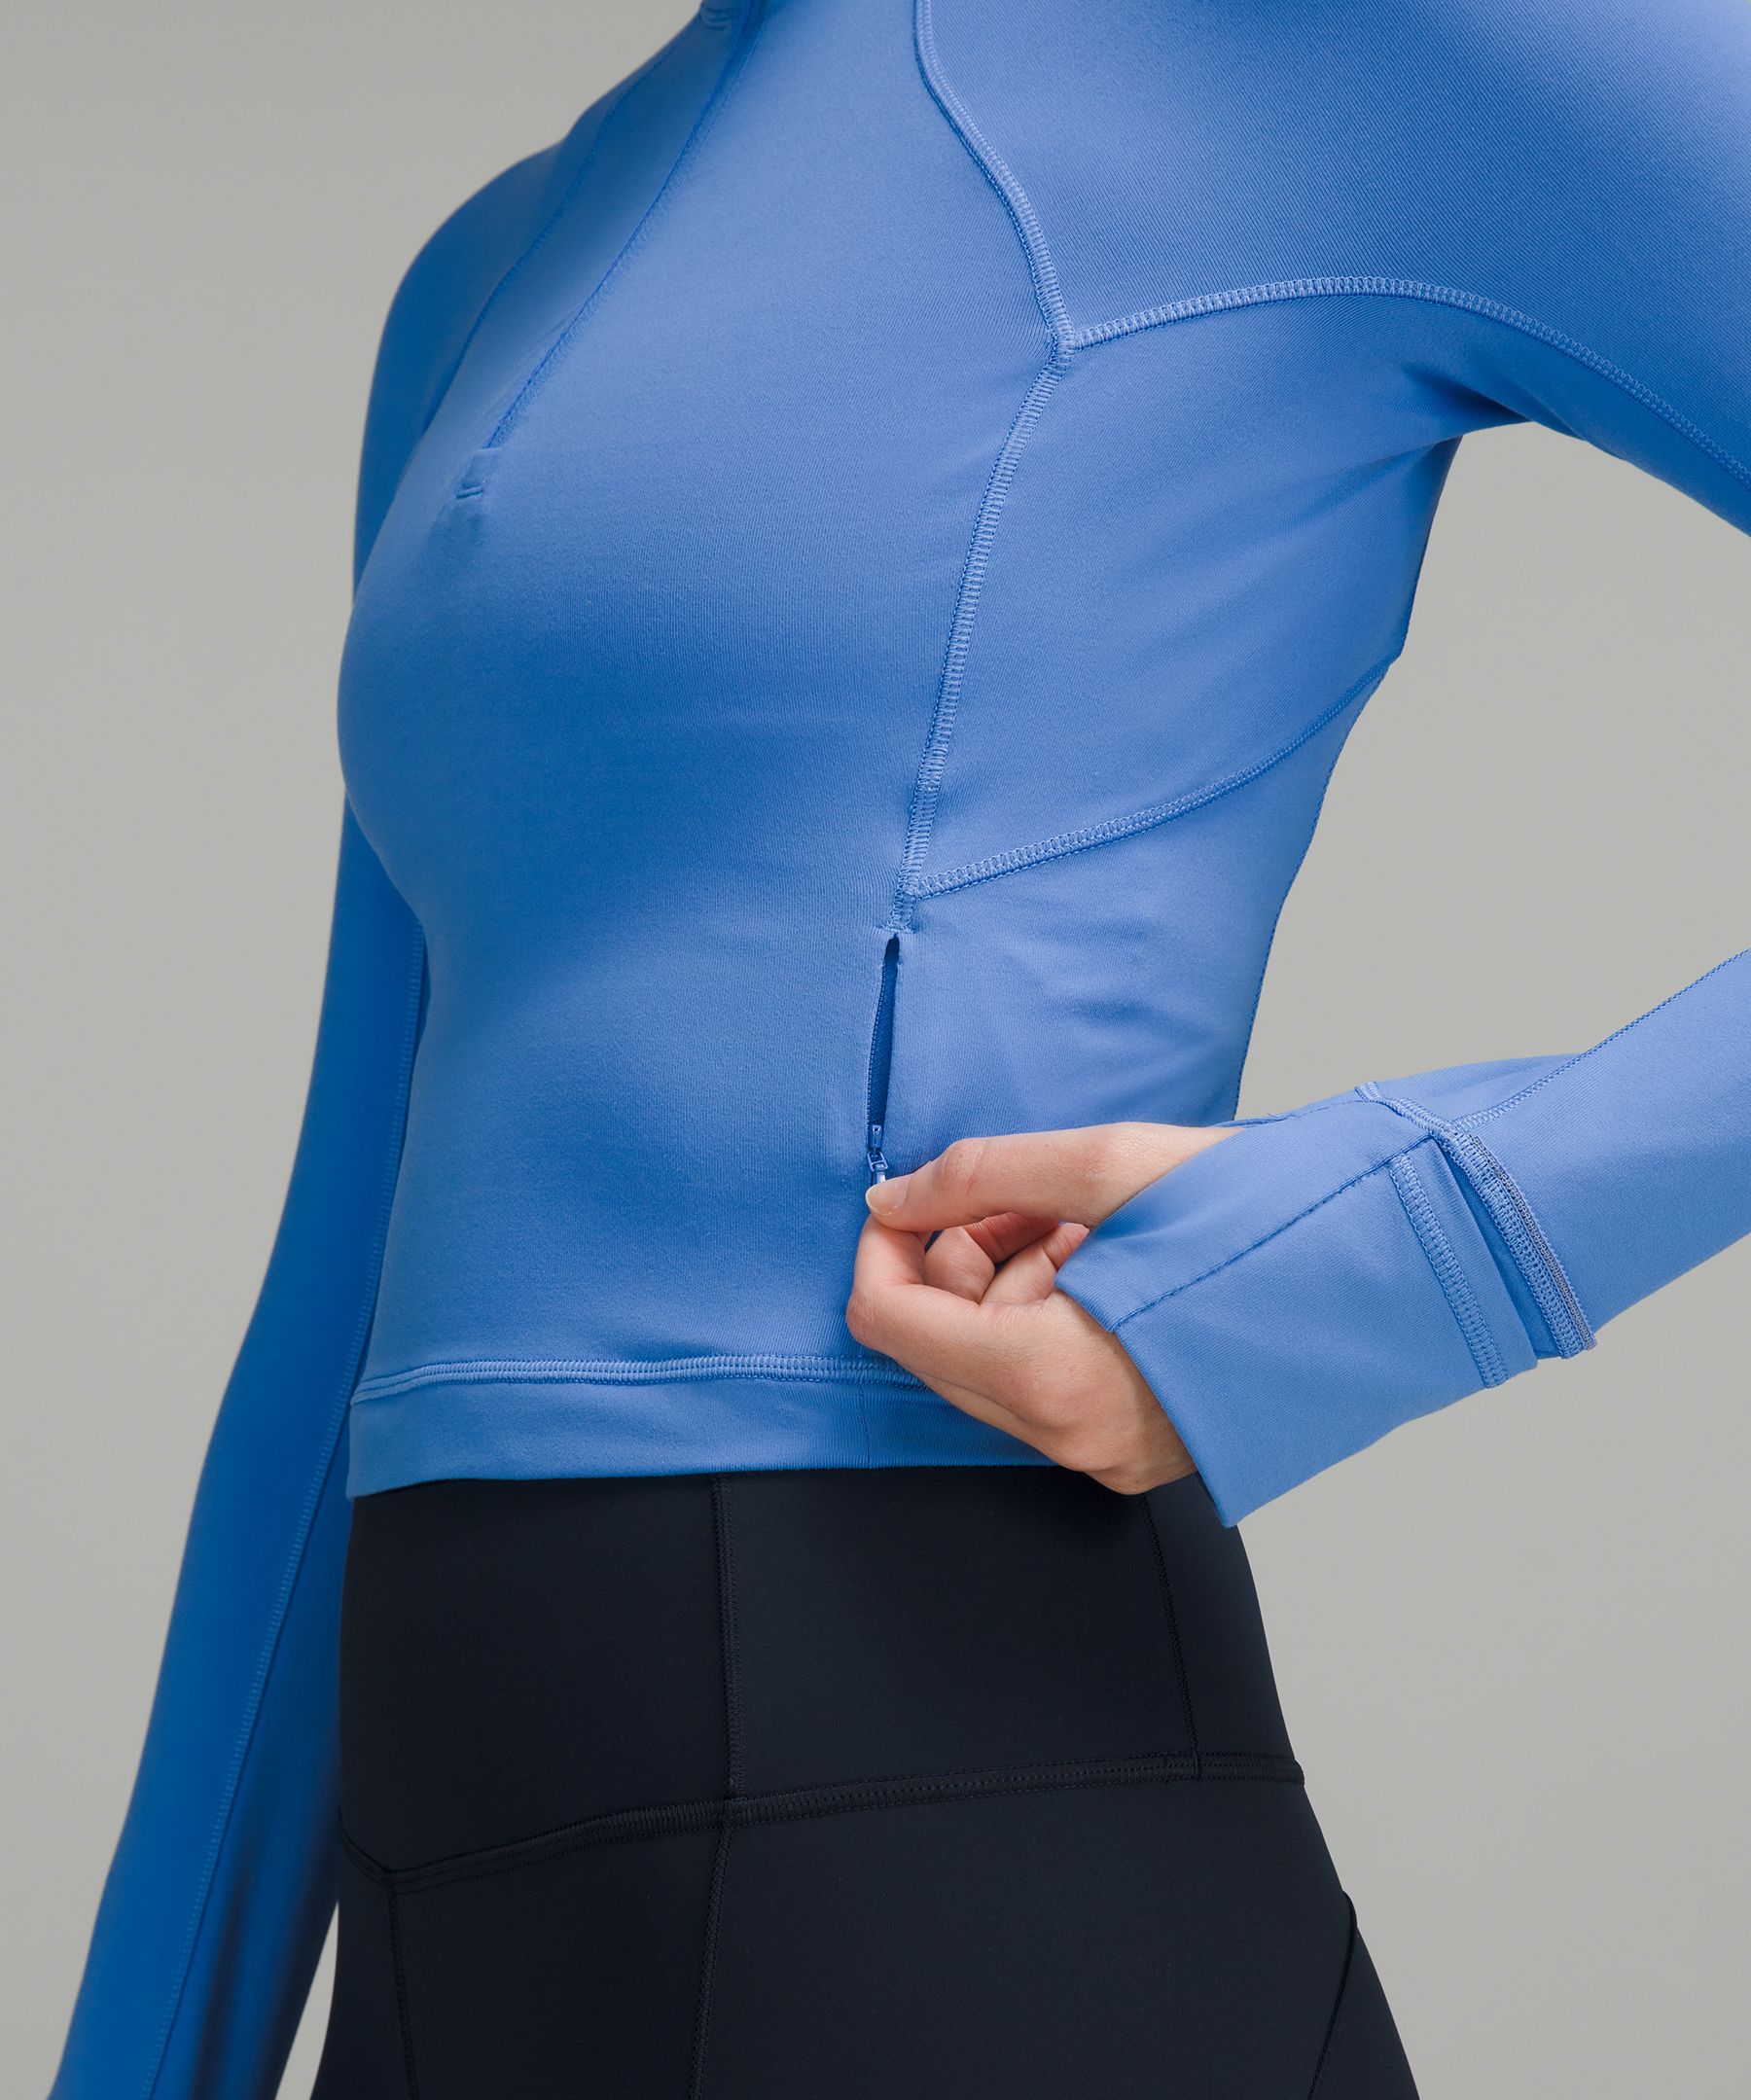 Lululemon Rulu Run Cropped Half-Zip Blue Size 2 - $46 (57% Off Retail) -  From Madeline